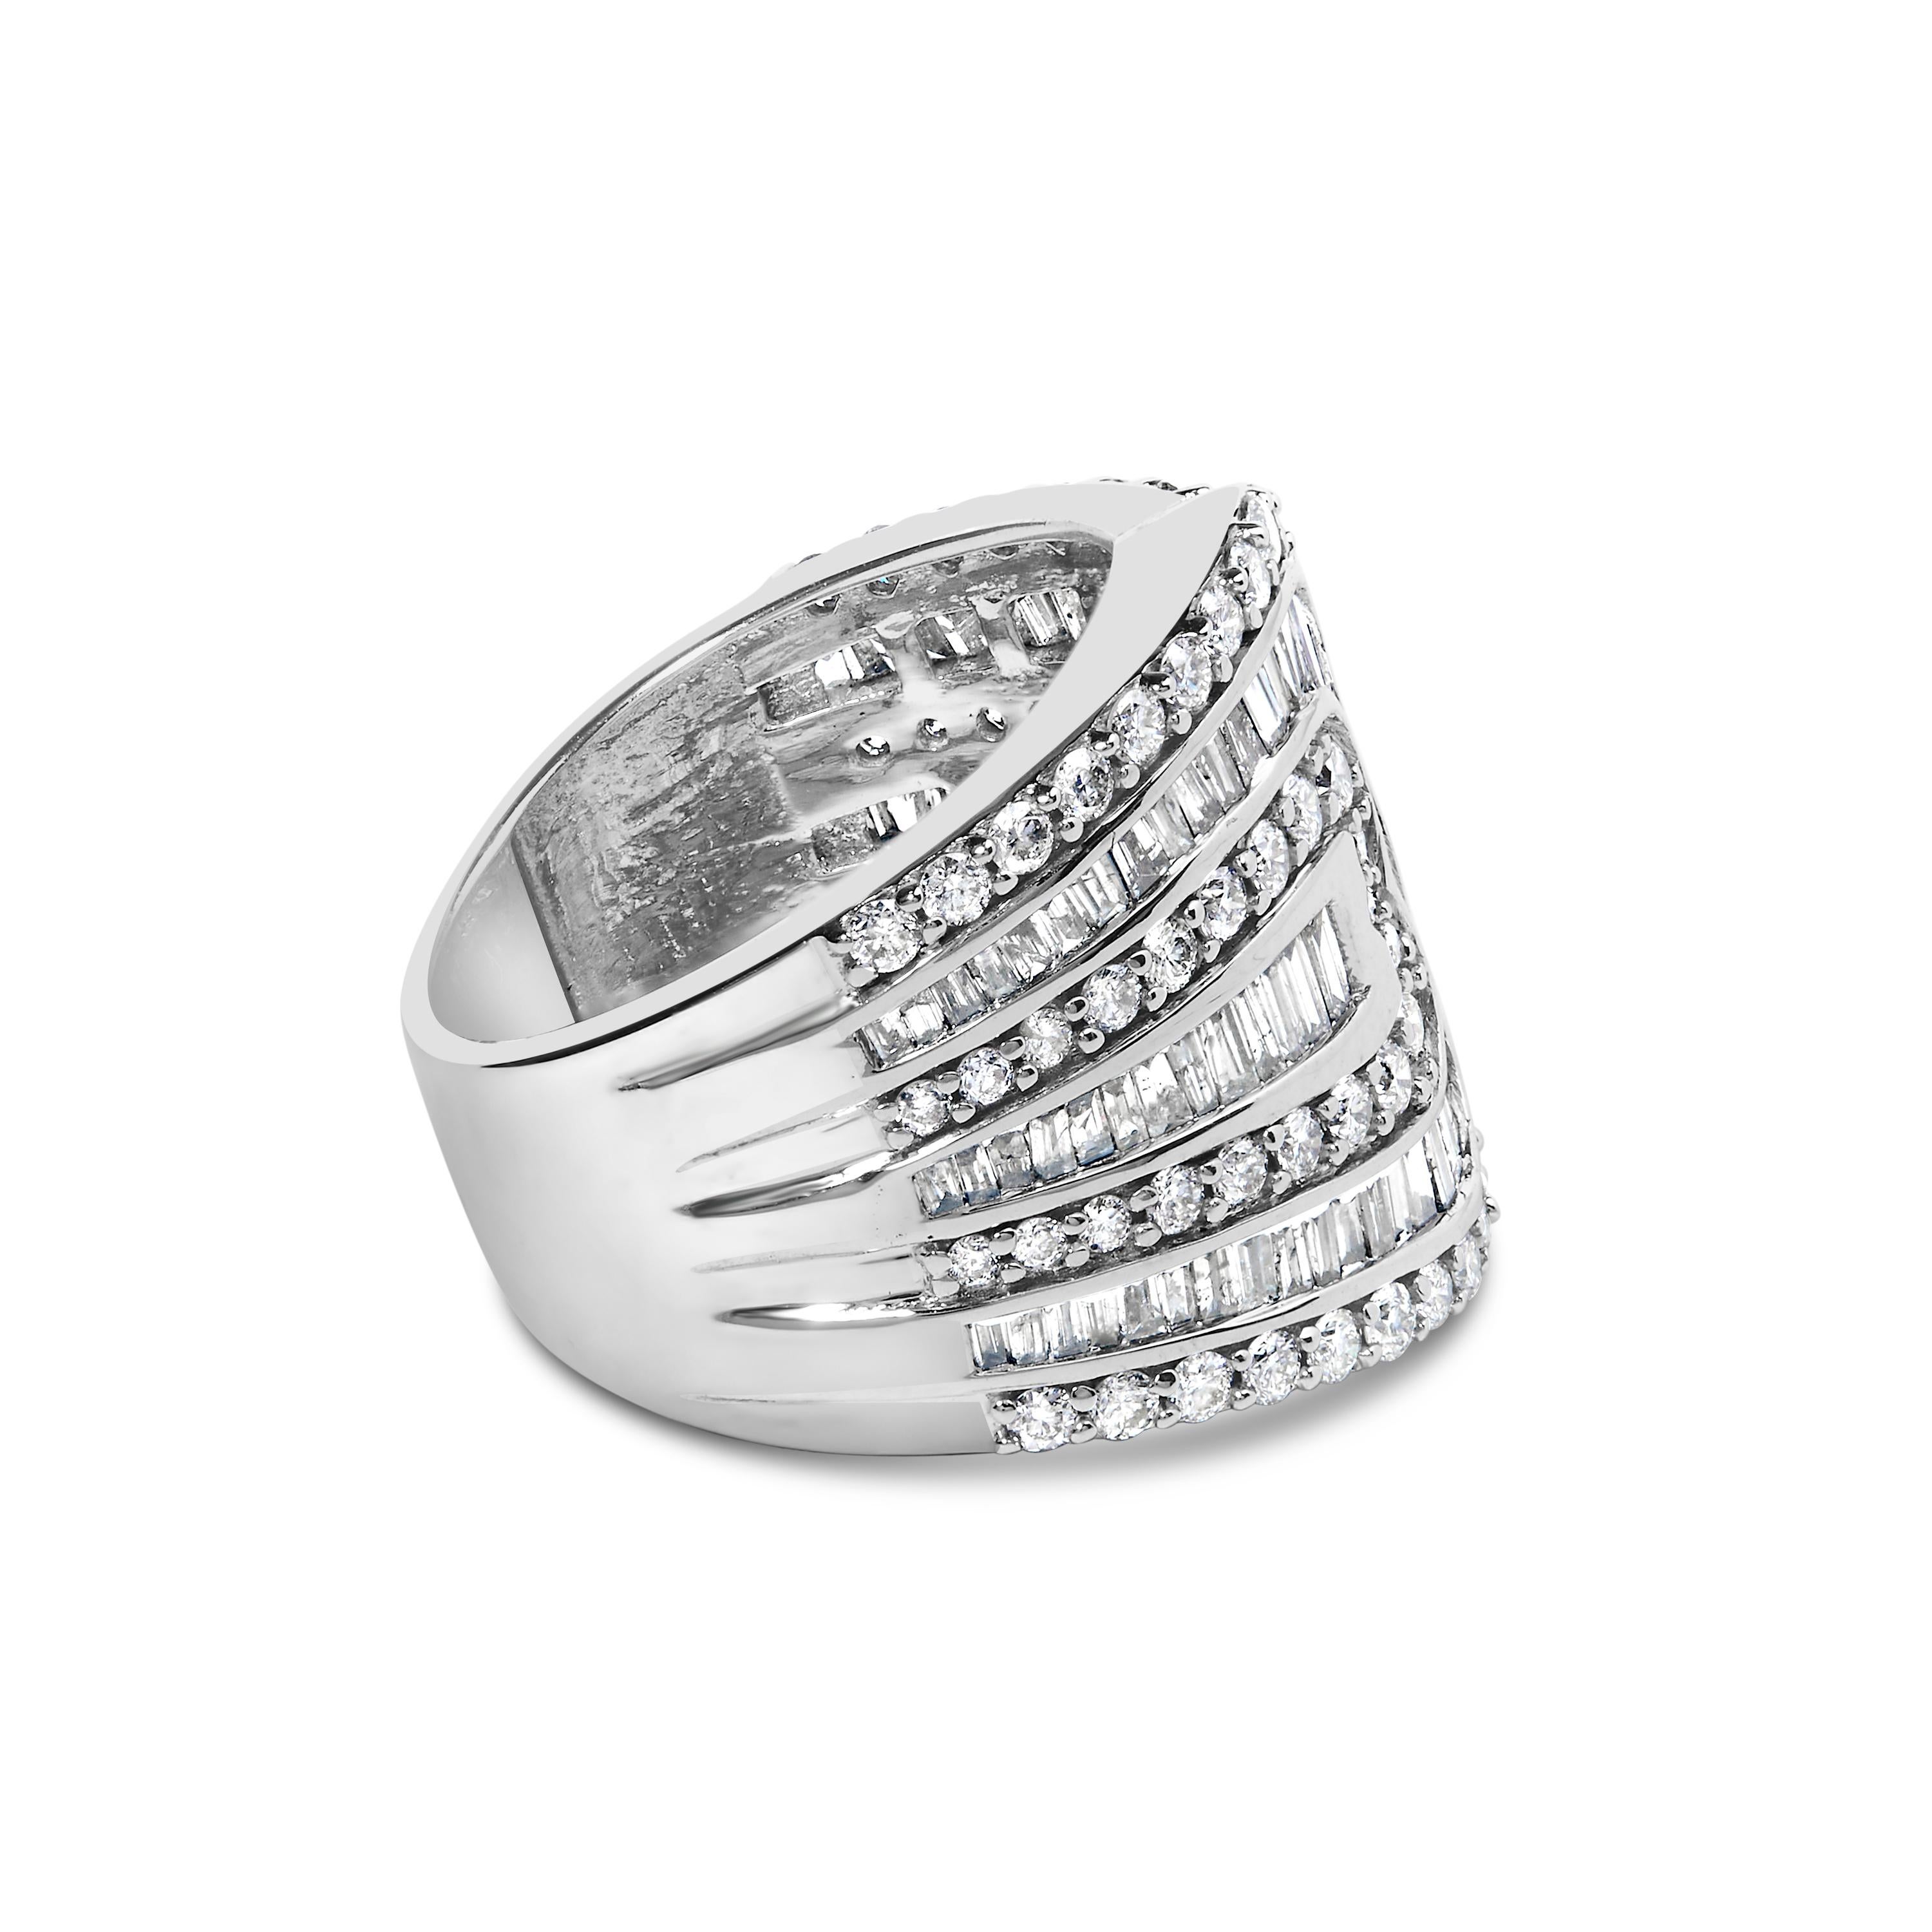 Bold and brilliant, this magnificent cluster diamond ring has an impressive total carat weight of 2 1/2 c.t. This piece is crafted in genuine 10k White Gold, a metal that will stay tarnish free for years to come. The ring shines with alternating